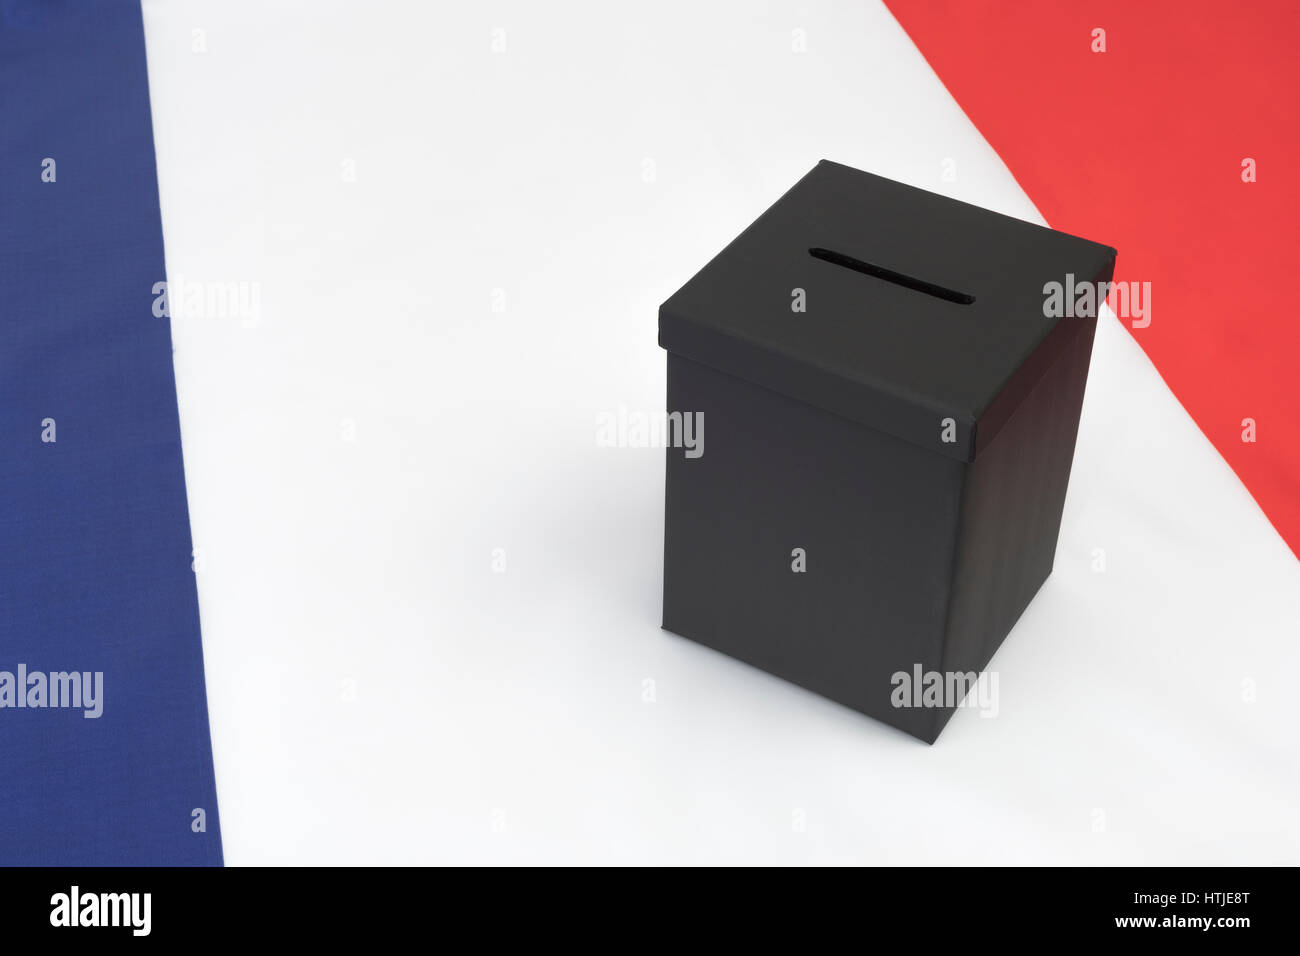 Small black box on French tricolor flag - as visual metaphor for the French Election. Stock Photo